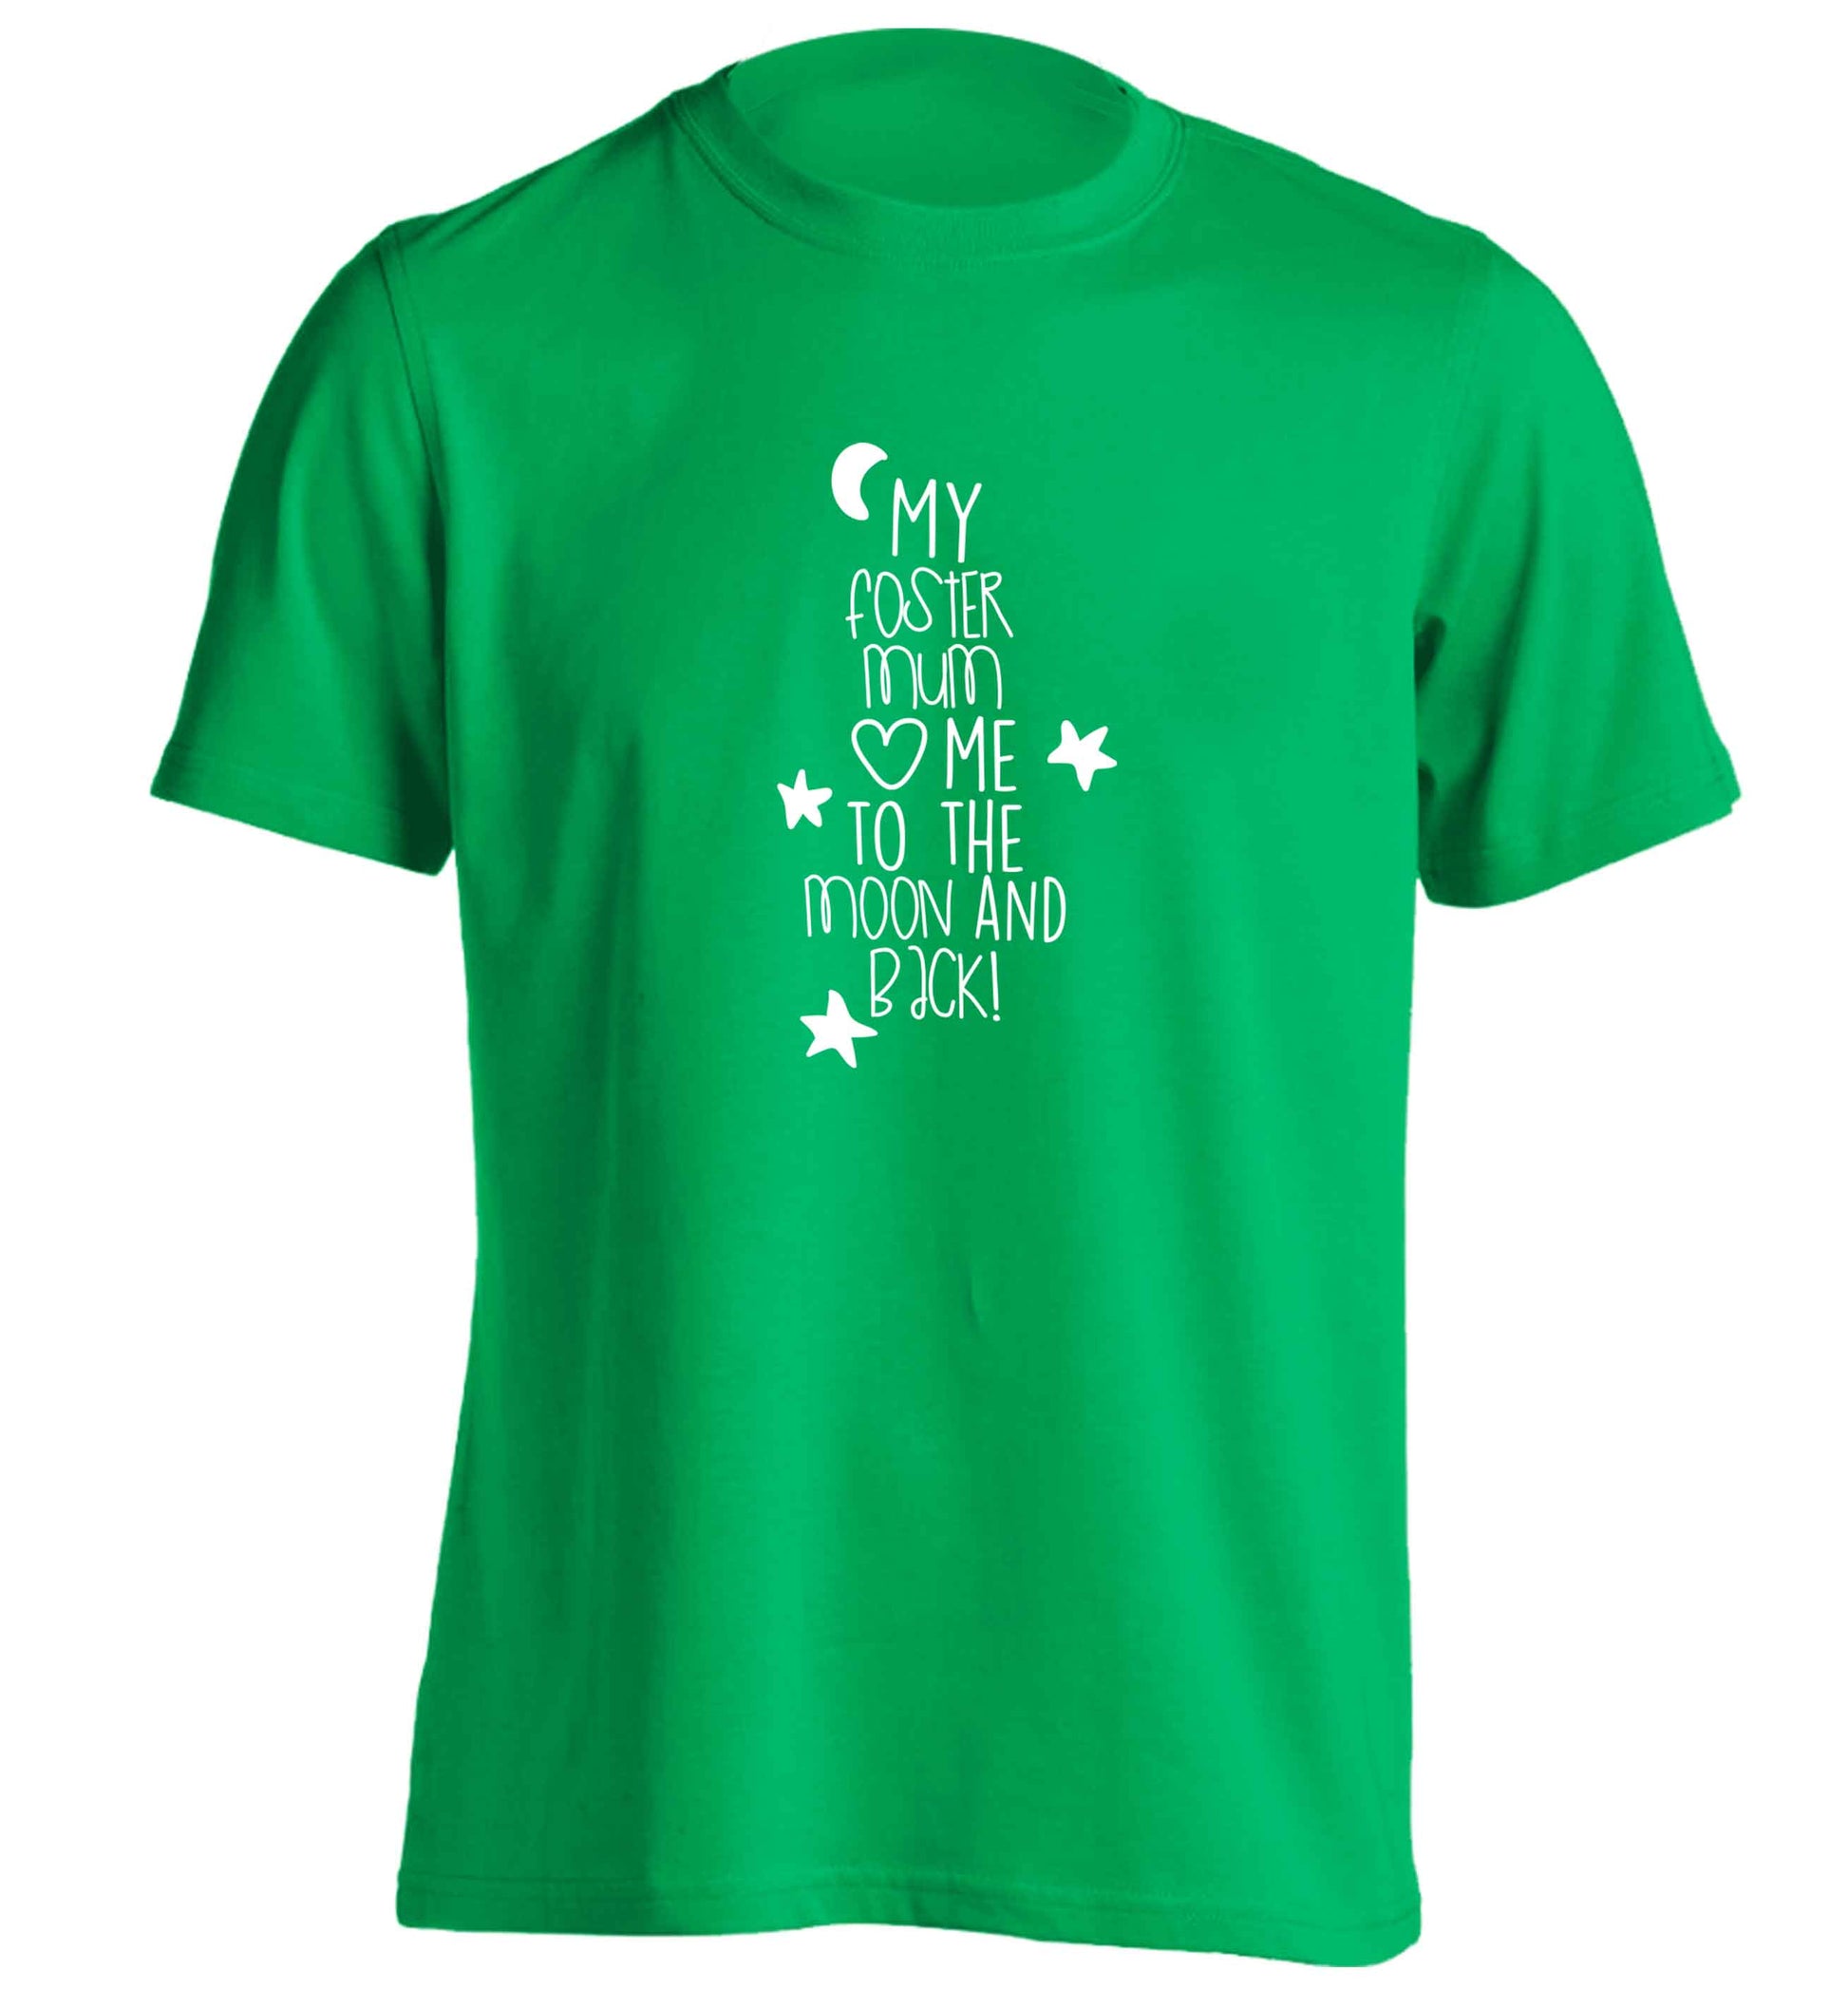 My foster mum loves me to the moon and back adults unisex green Tshirt small